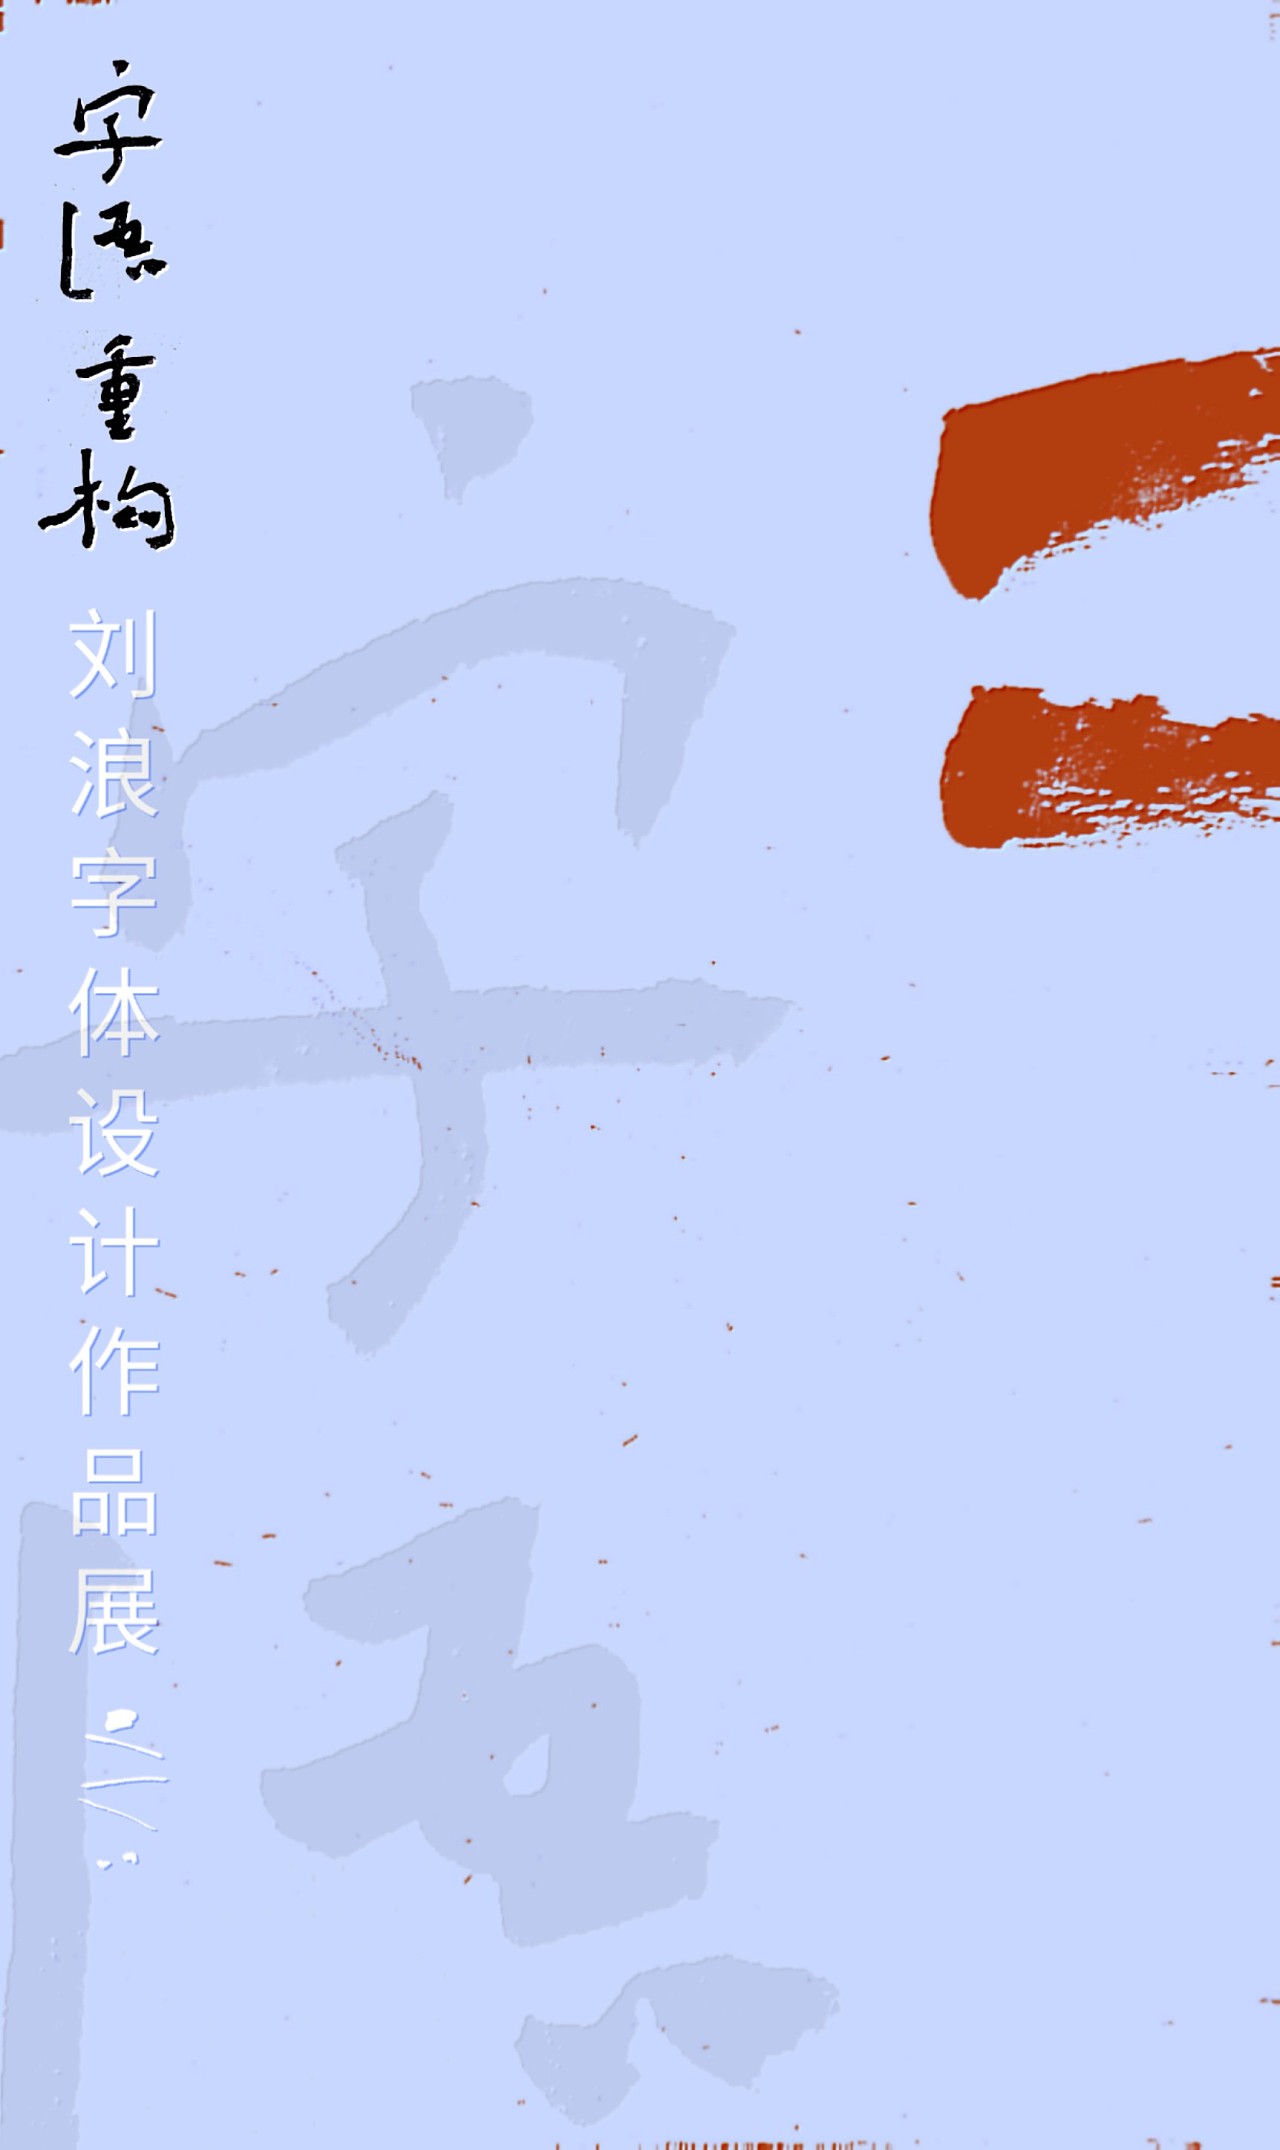 Chinese Creative Font DesignFrom general symmetrical constitution to complex repeated constitution